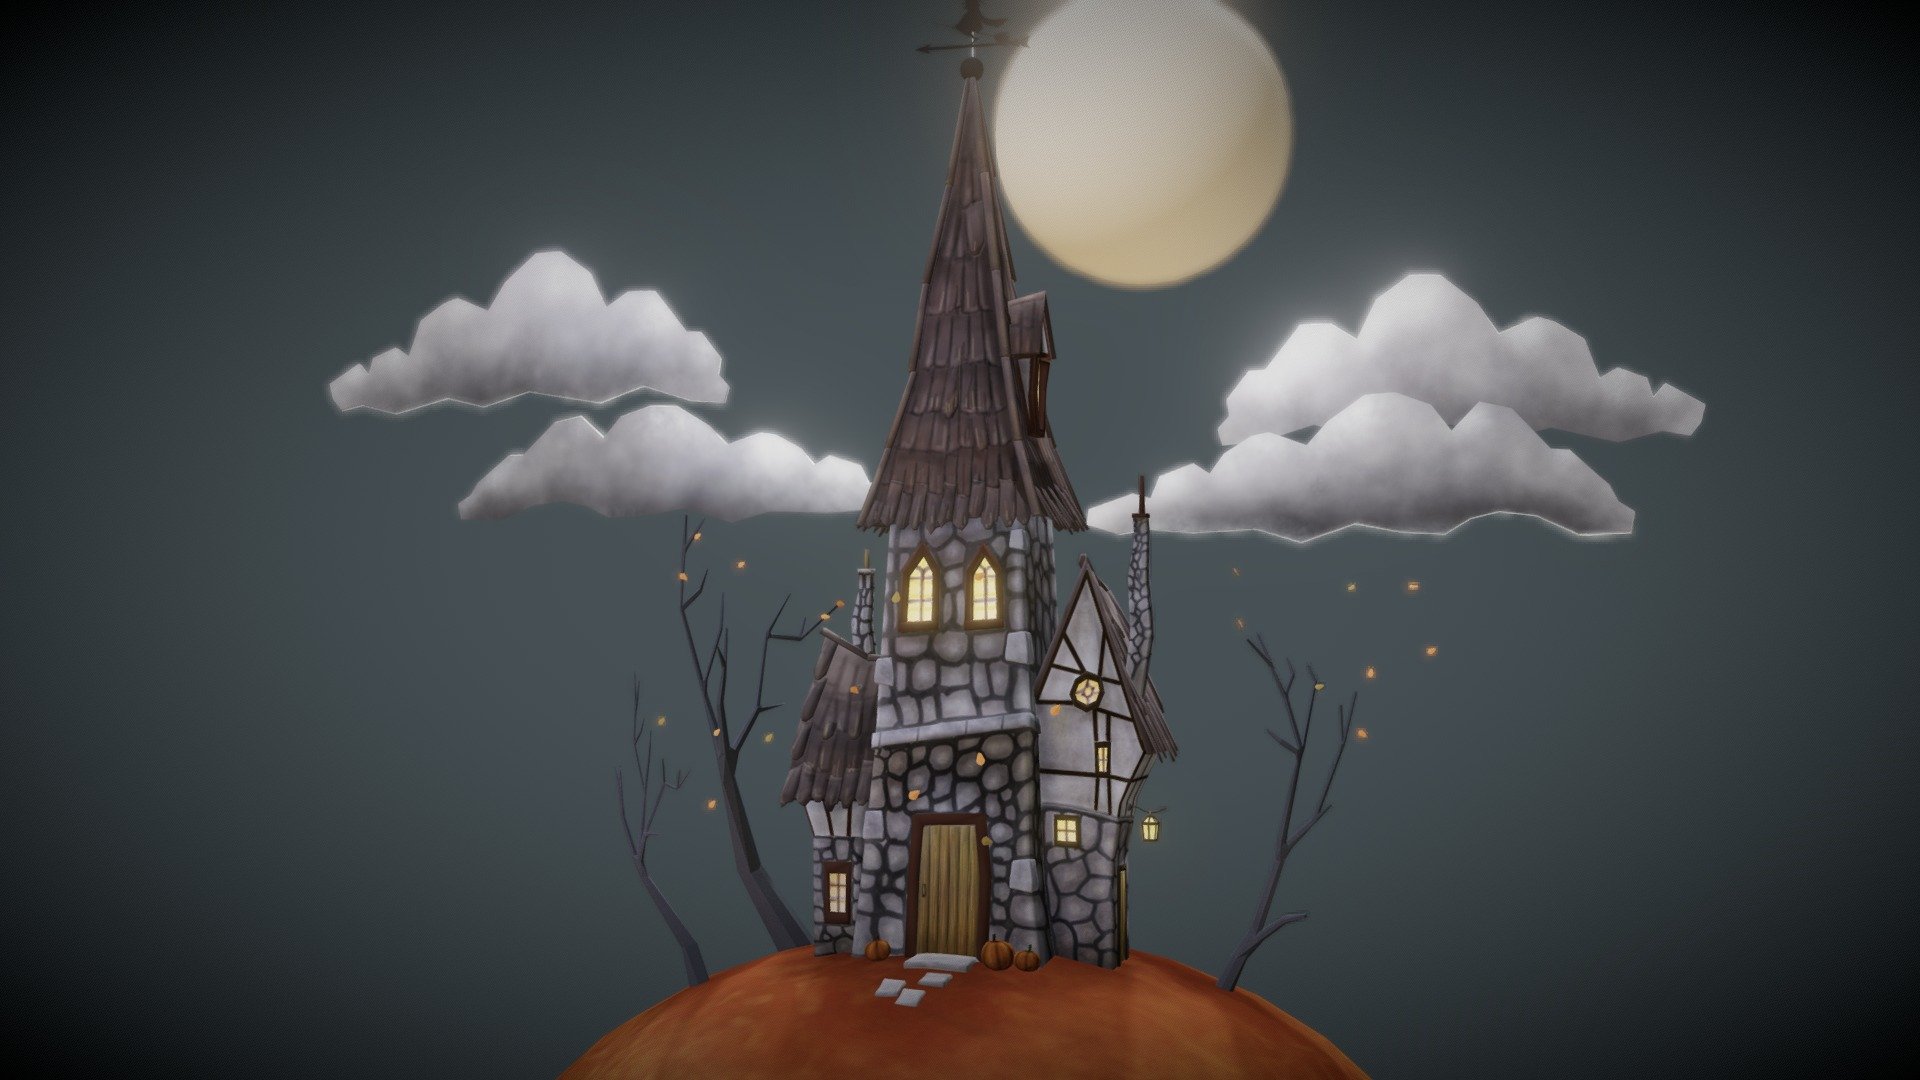 Influenced by the work of gary walton. I created this old house in blender using hand painted techniques. 

Initially it was meant to be a holoween scene but I missed halloween :)

All made in Blender - Halloween Autumn Old House Cartoon style - Buy Royalty Free 3D model by grant.abbitt 3d model